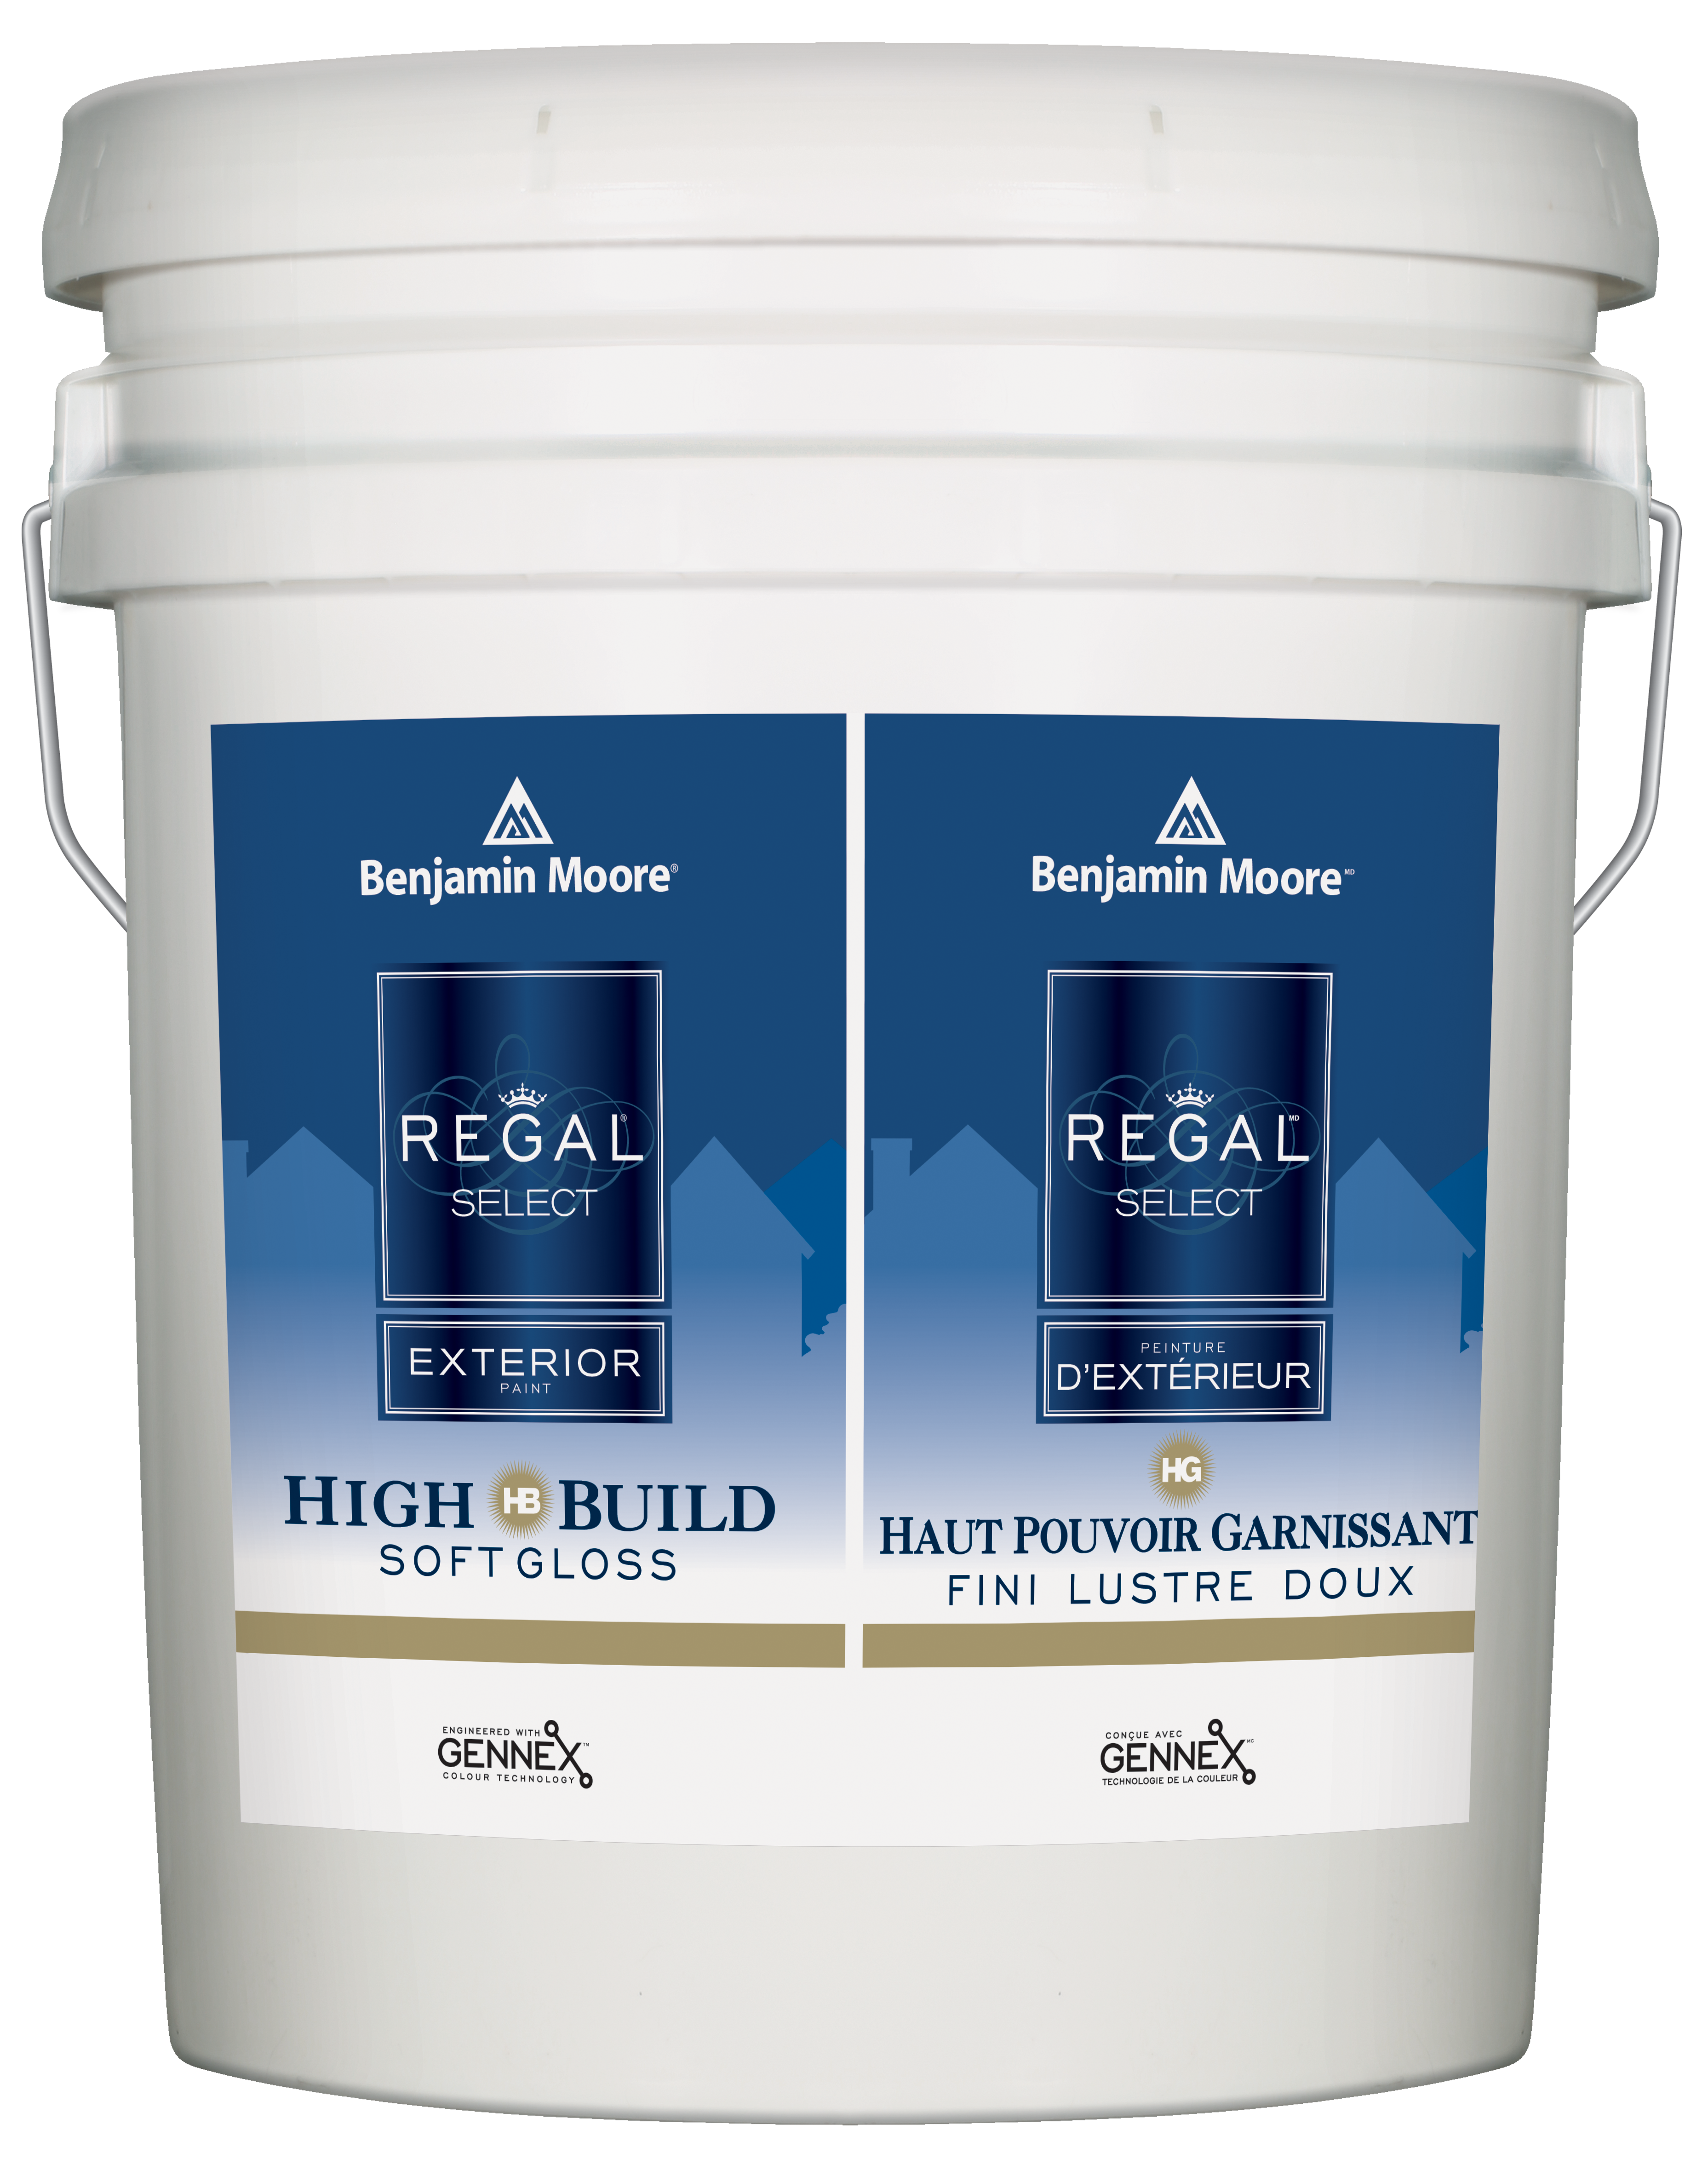 REGAL Select exterior with high filling power